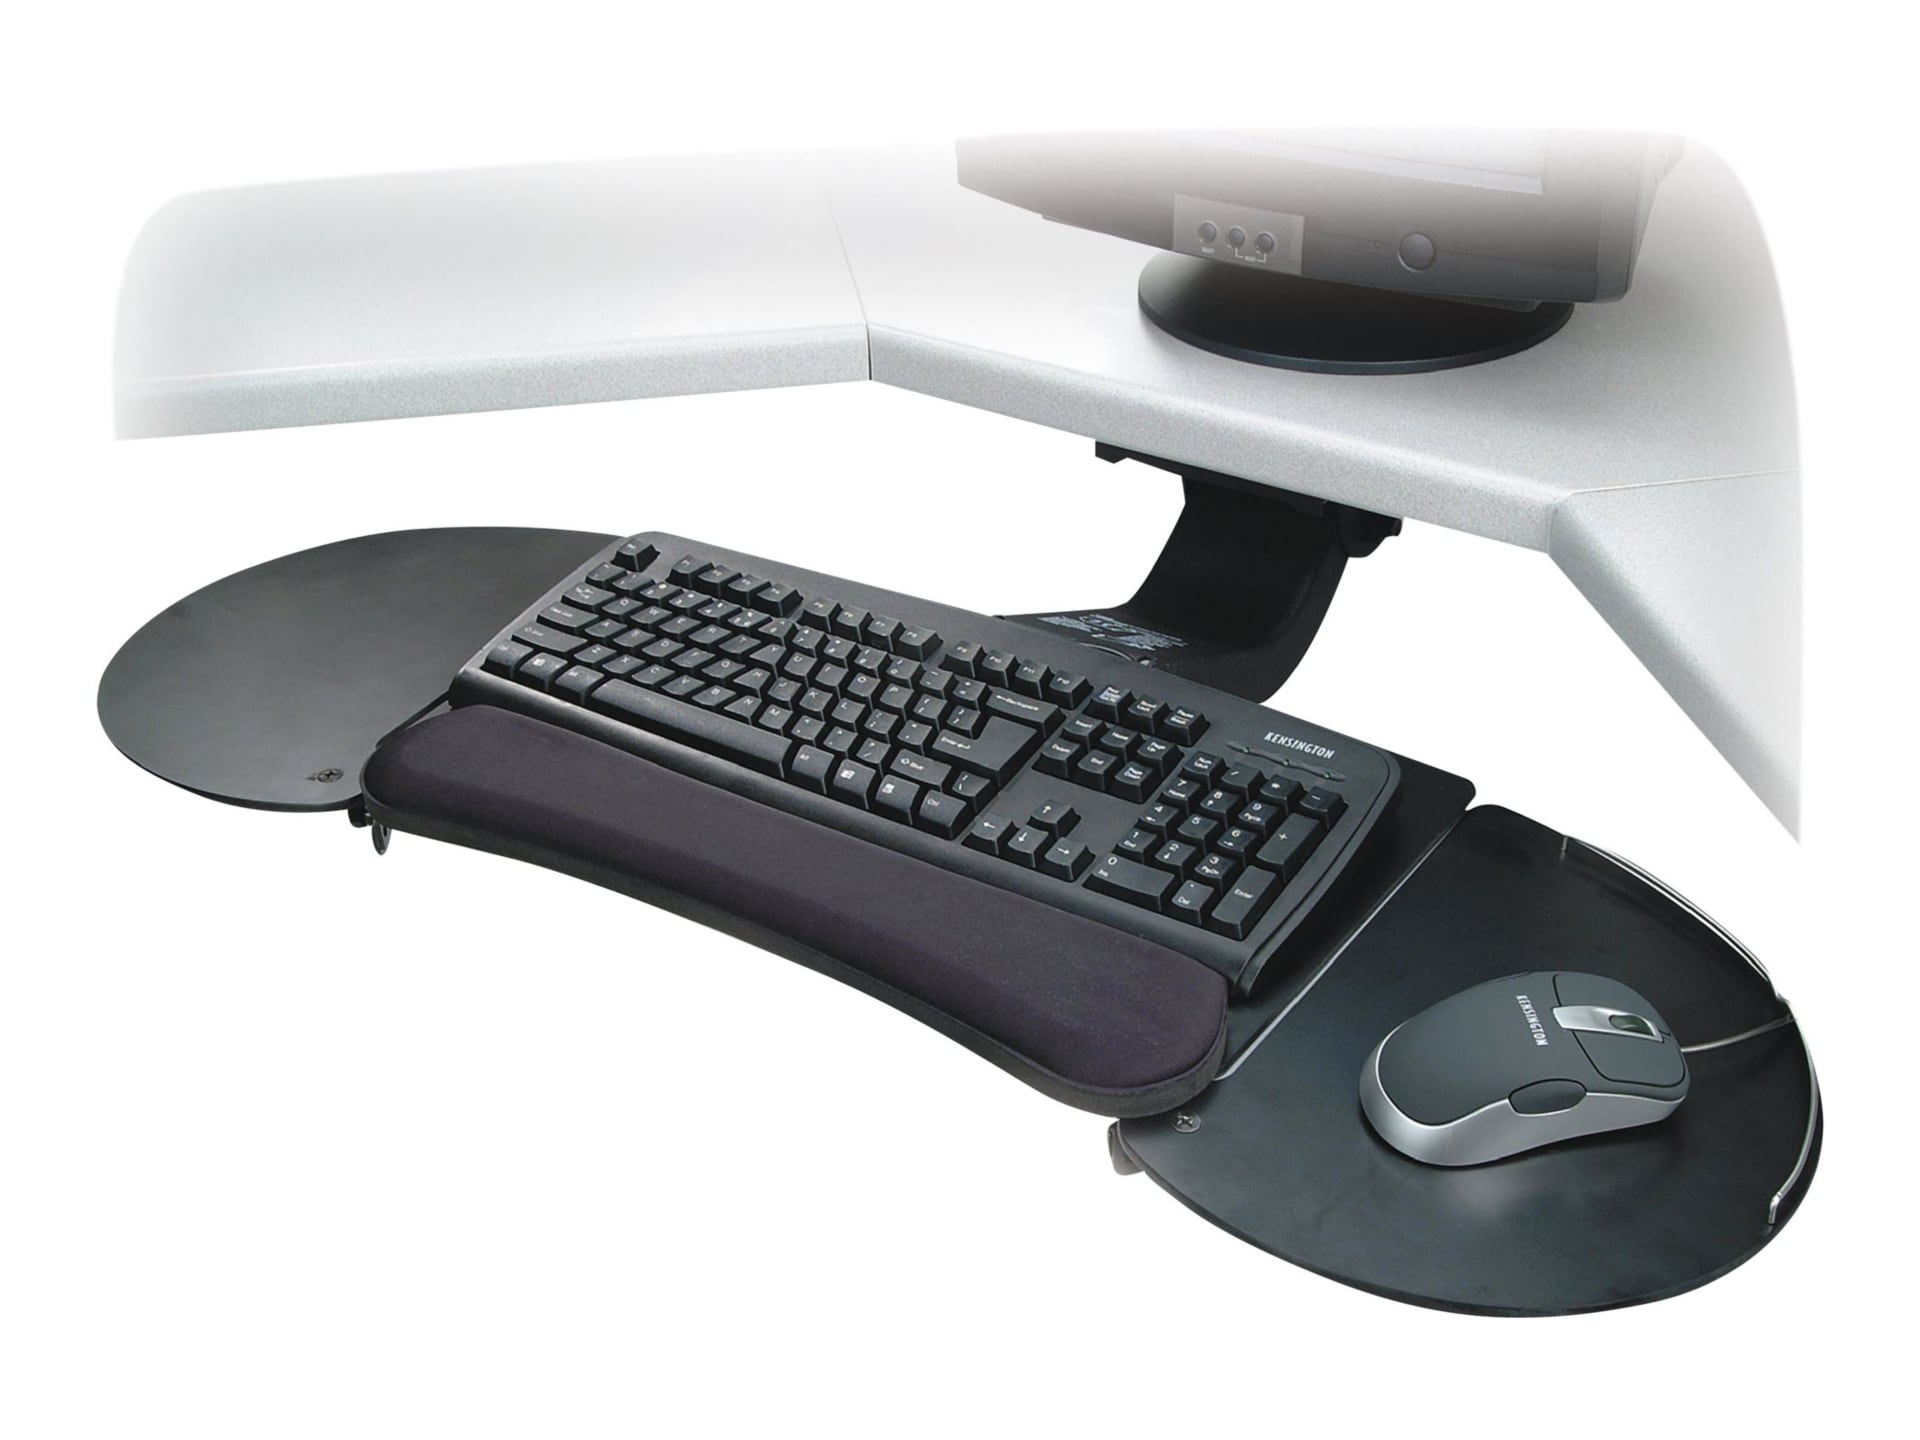 Kensington Fully Adjustable and Articulating Keyboard Platform - keyboard and mouse platform with wrist pillow